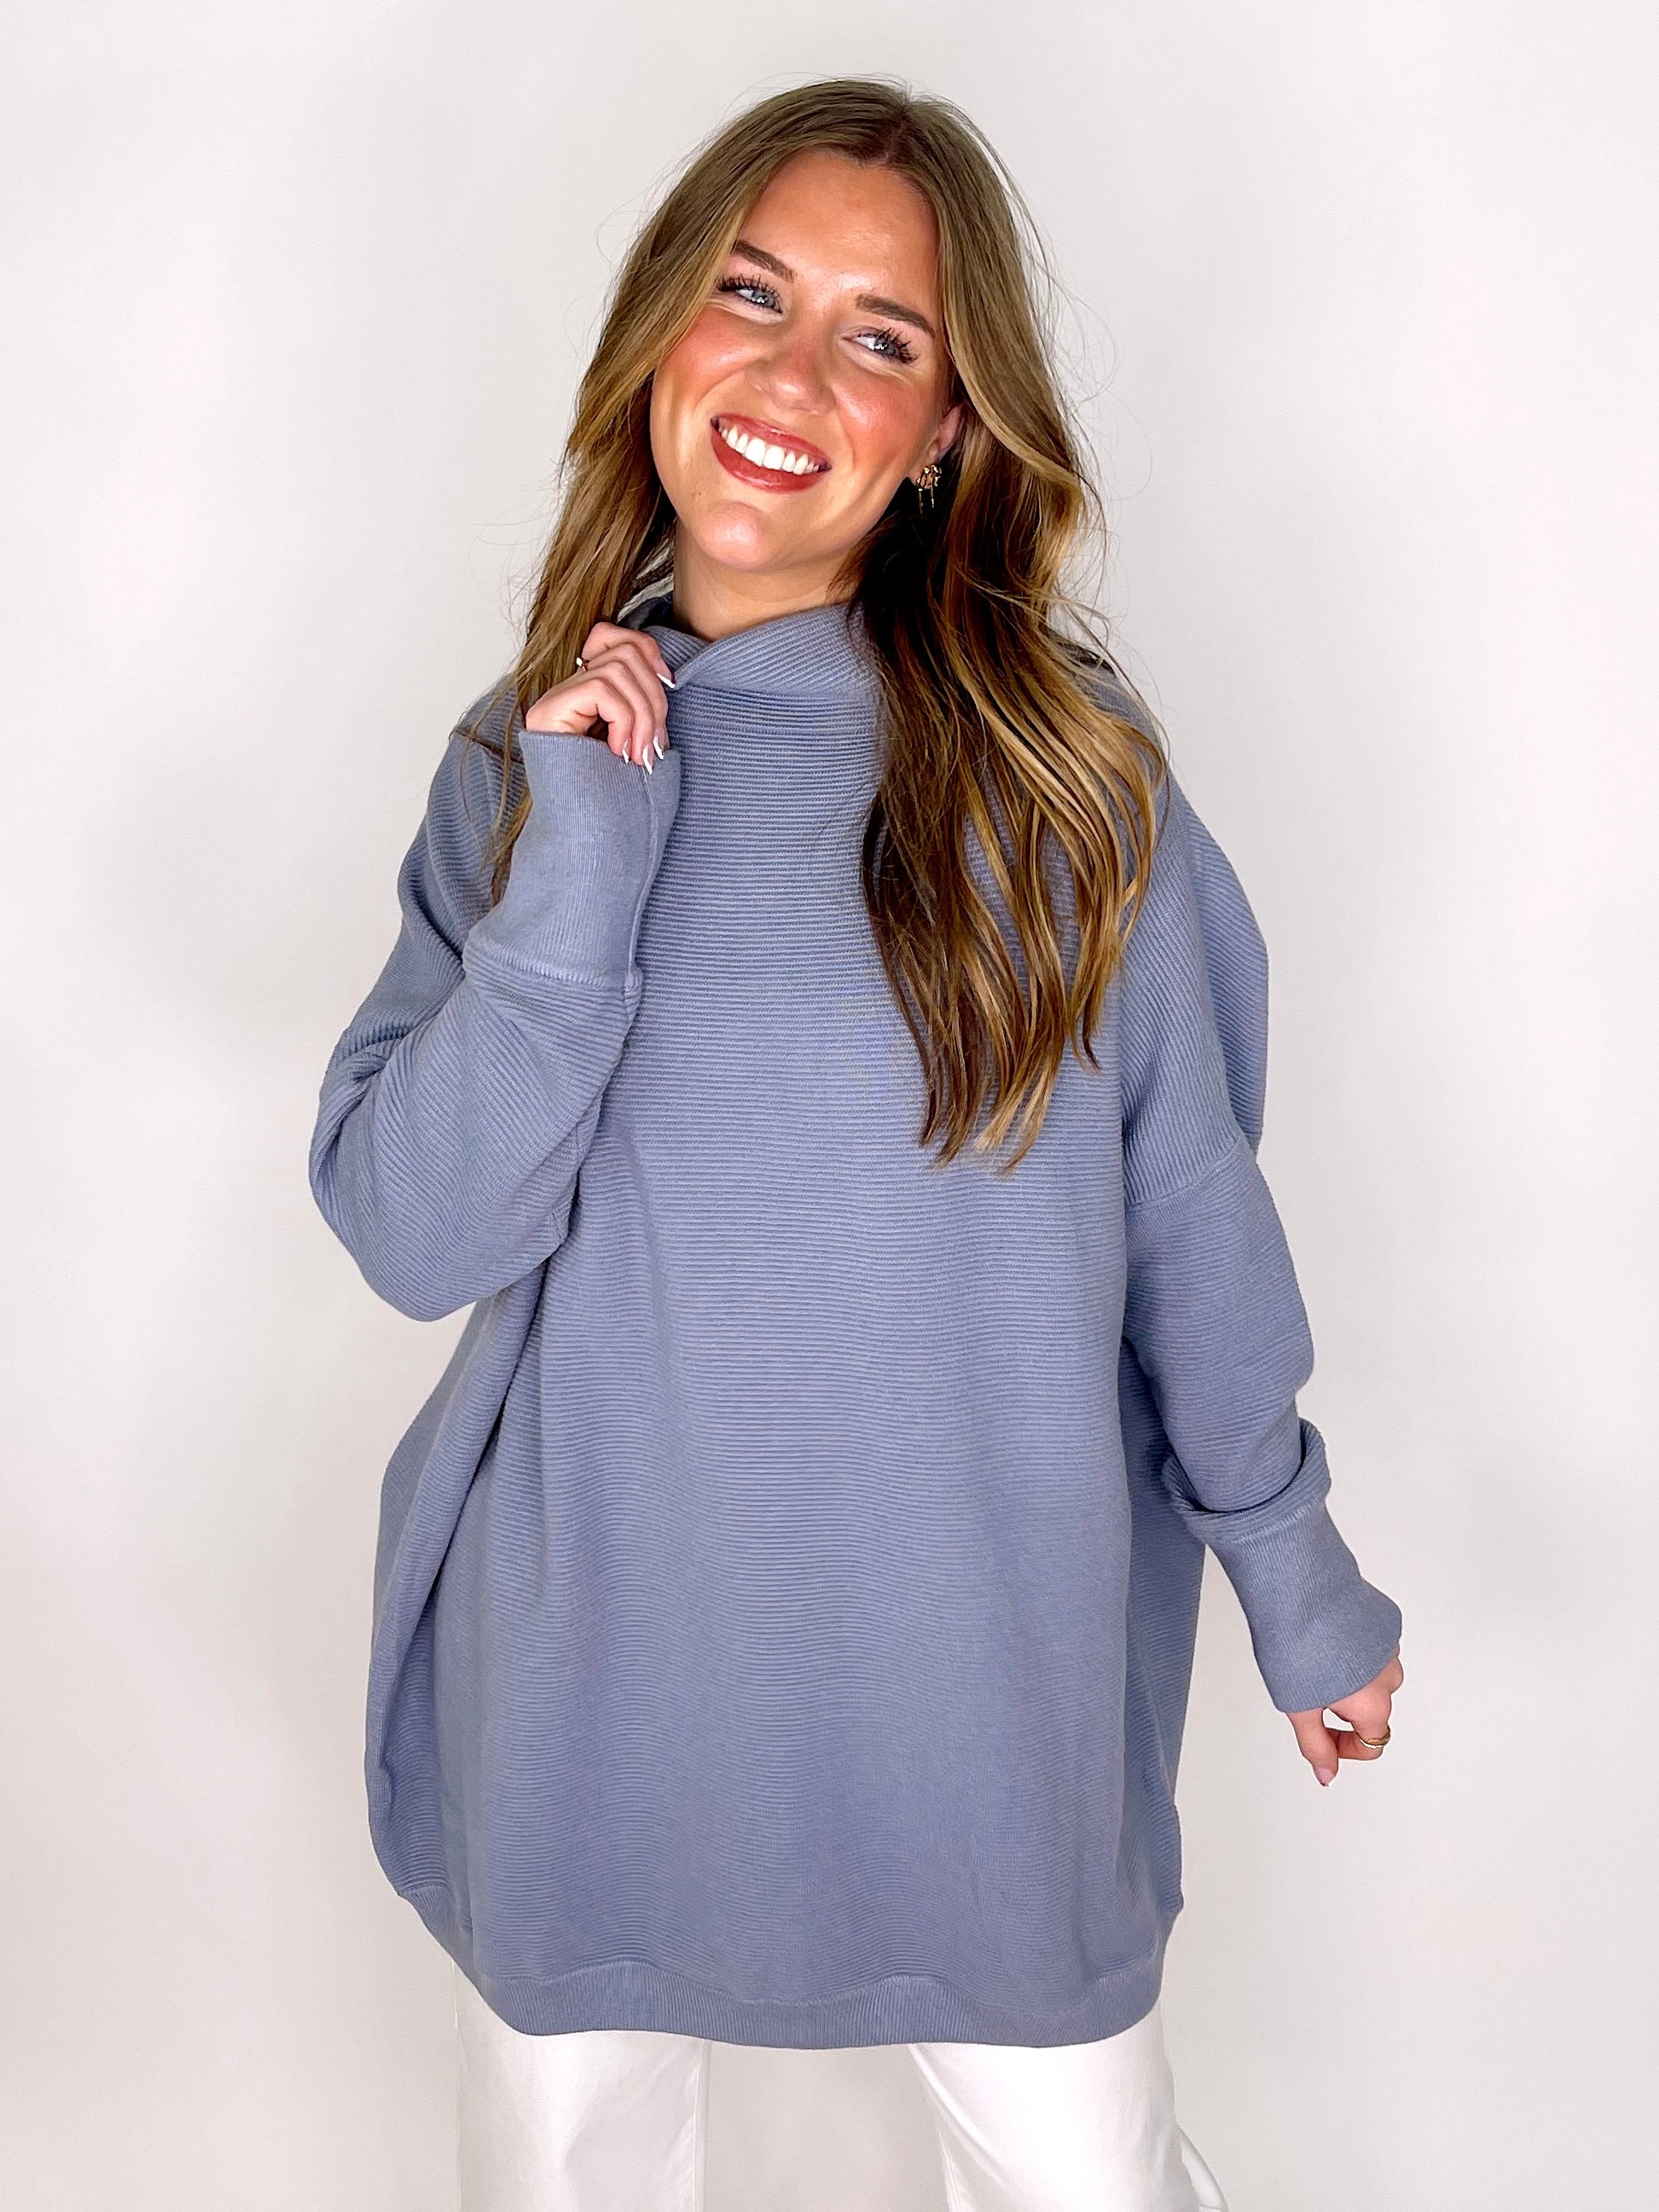 The Anne Sweater-Sweaters-Anniewear-The Village Shoppe, Women’s Fashion Boutique, Shop Online and In Store - Located in Muscle Shoals, AL.